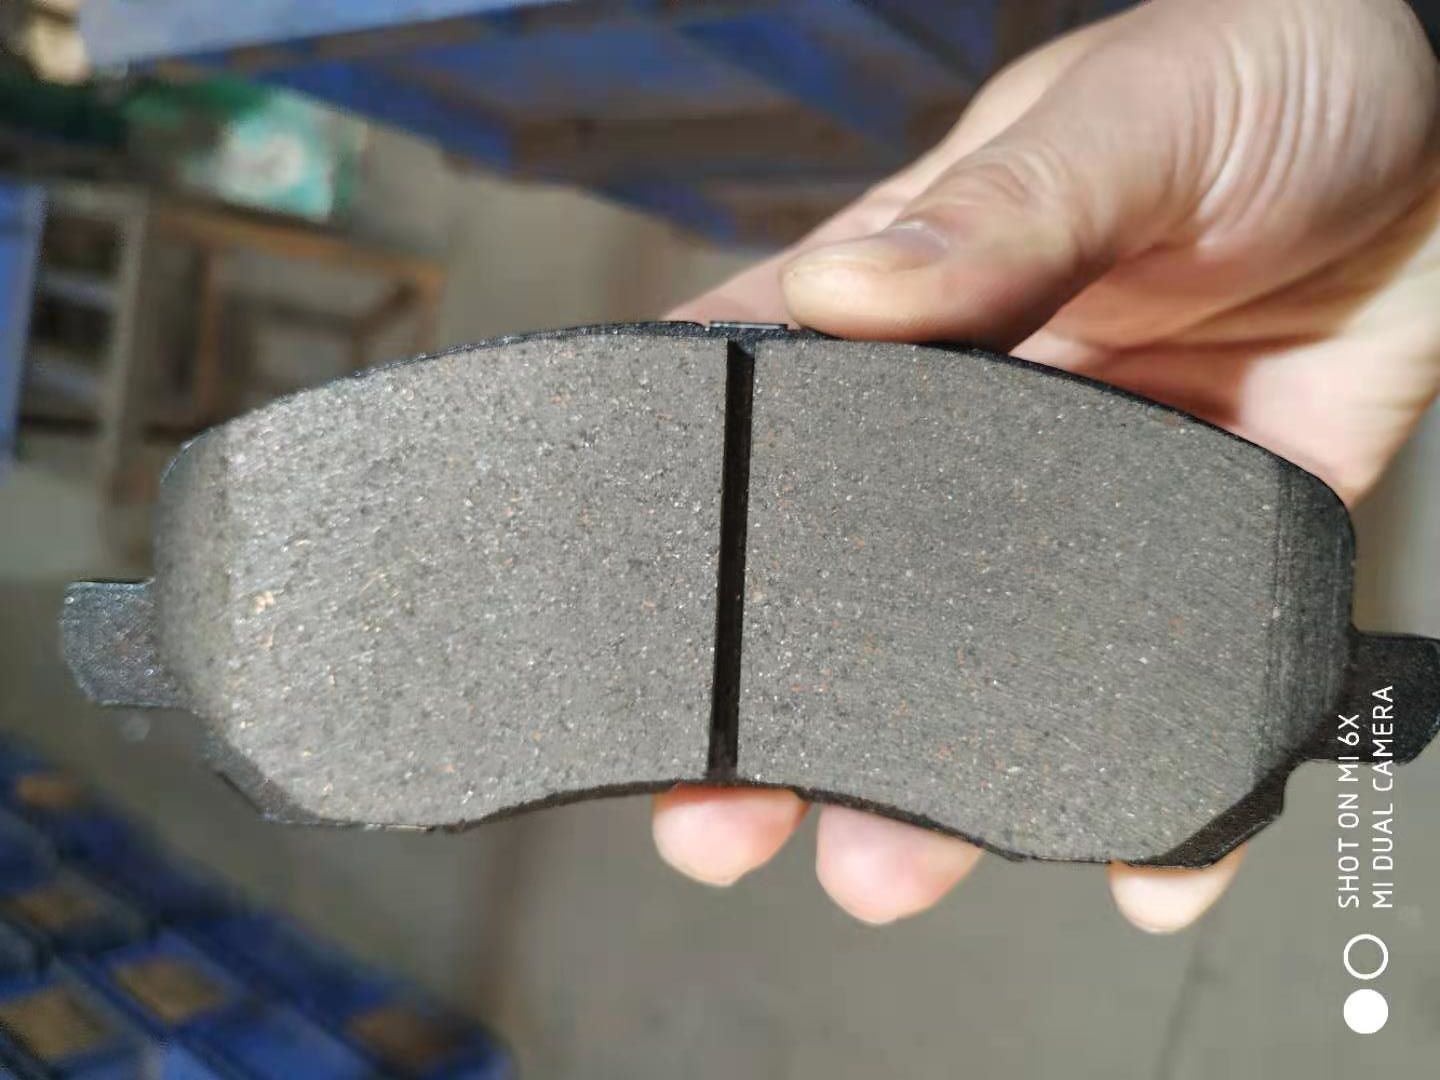 Chinese brake lining standards and international brake lining standards